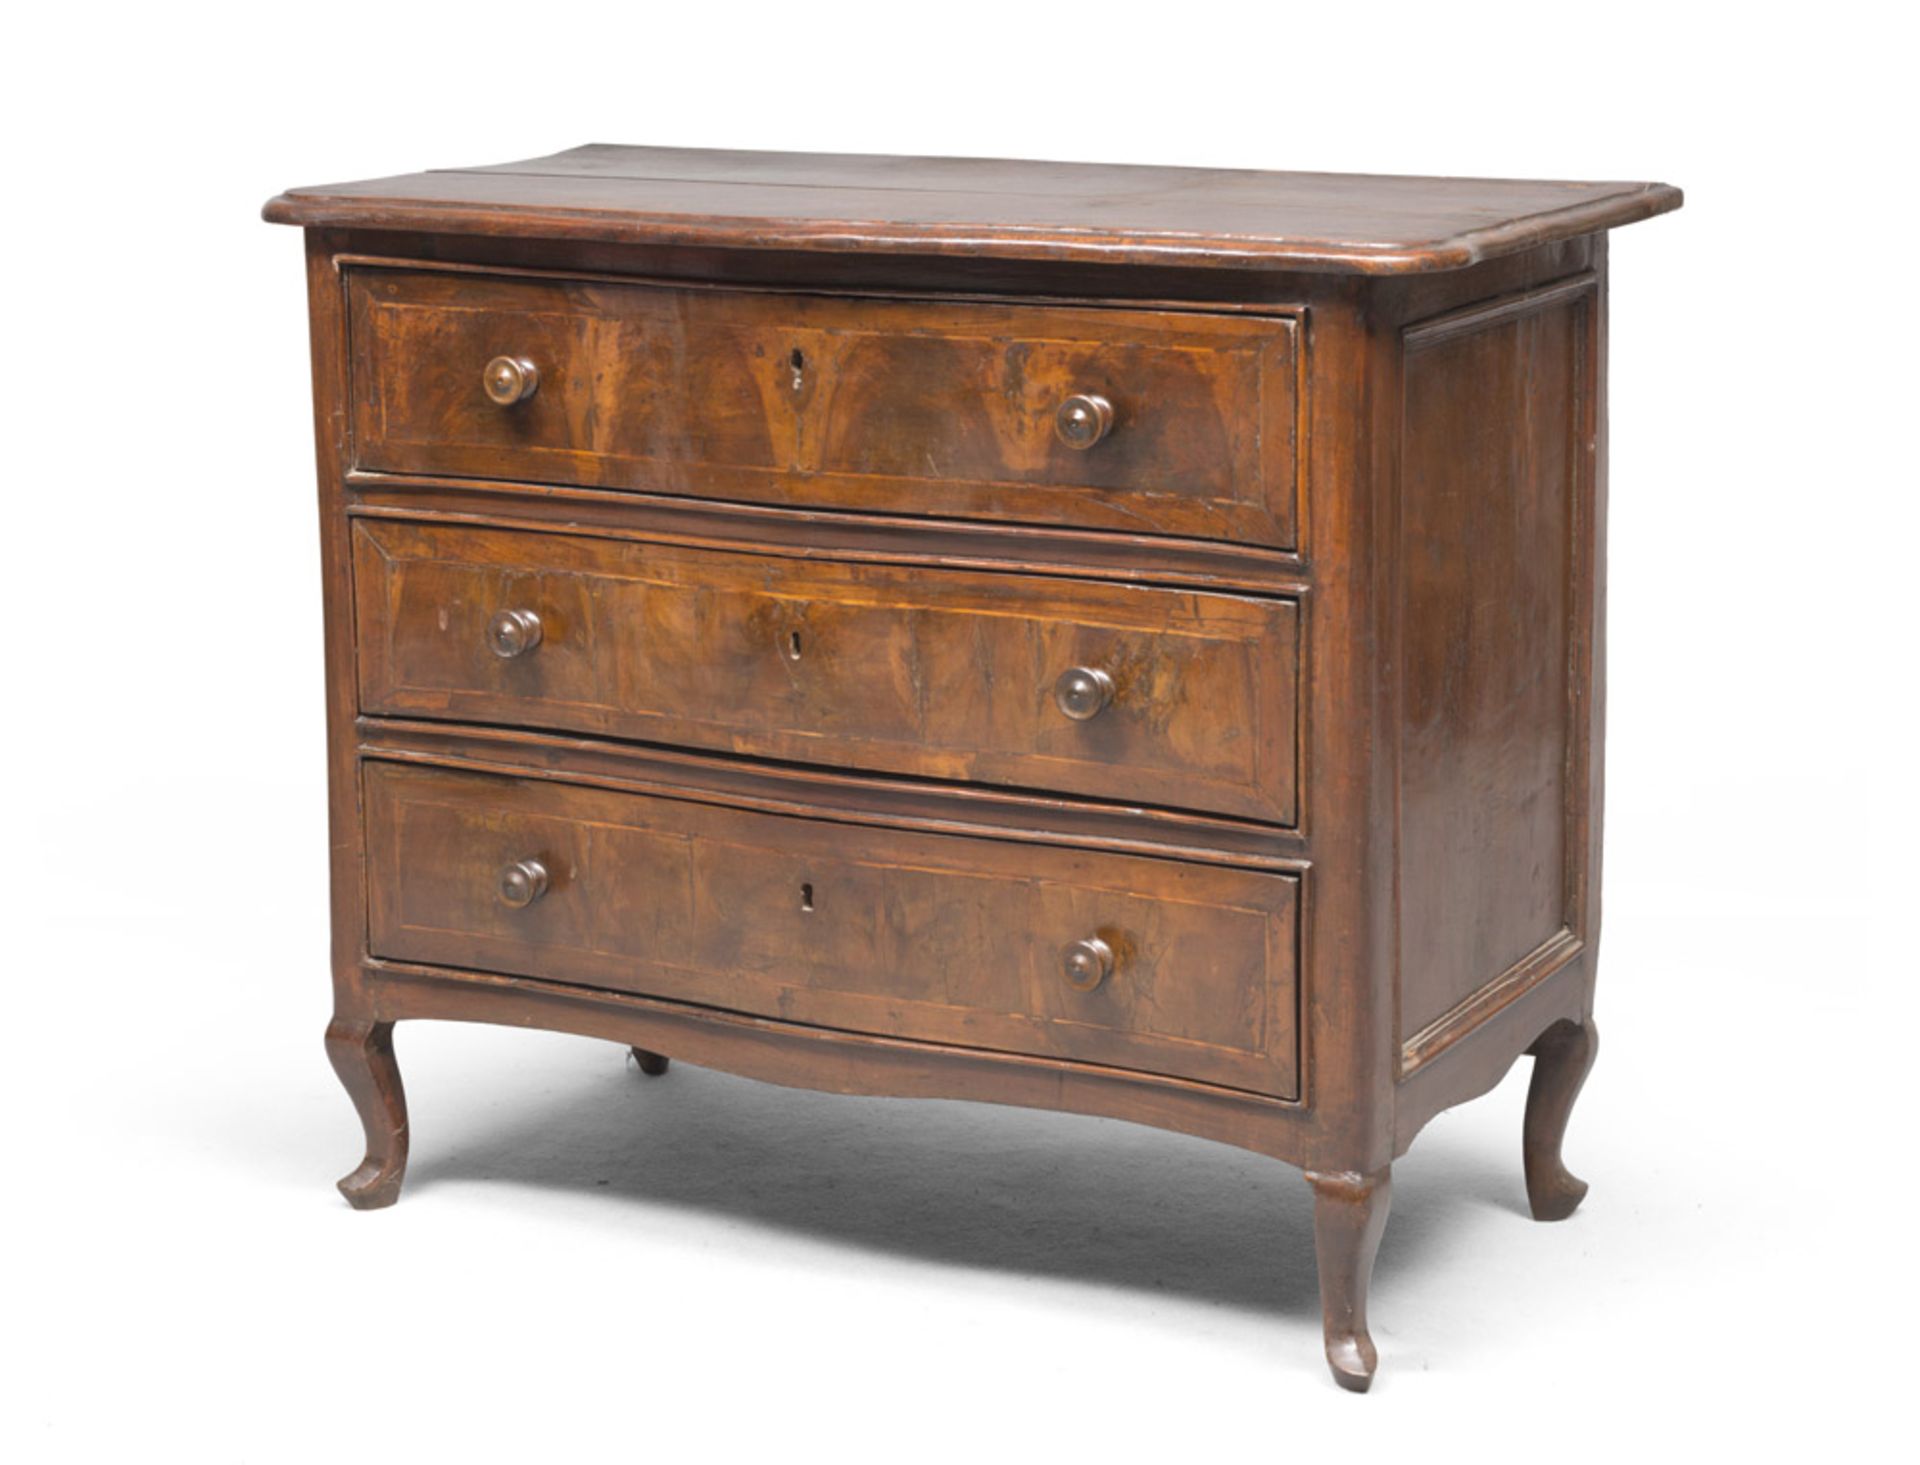 SMALL WALNUT COMMODE, ROME 18TH CENTURY top with moved edges and front with three drawers with